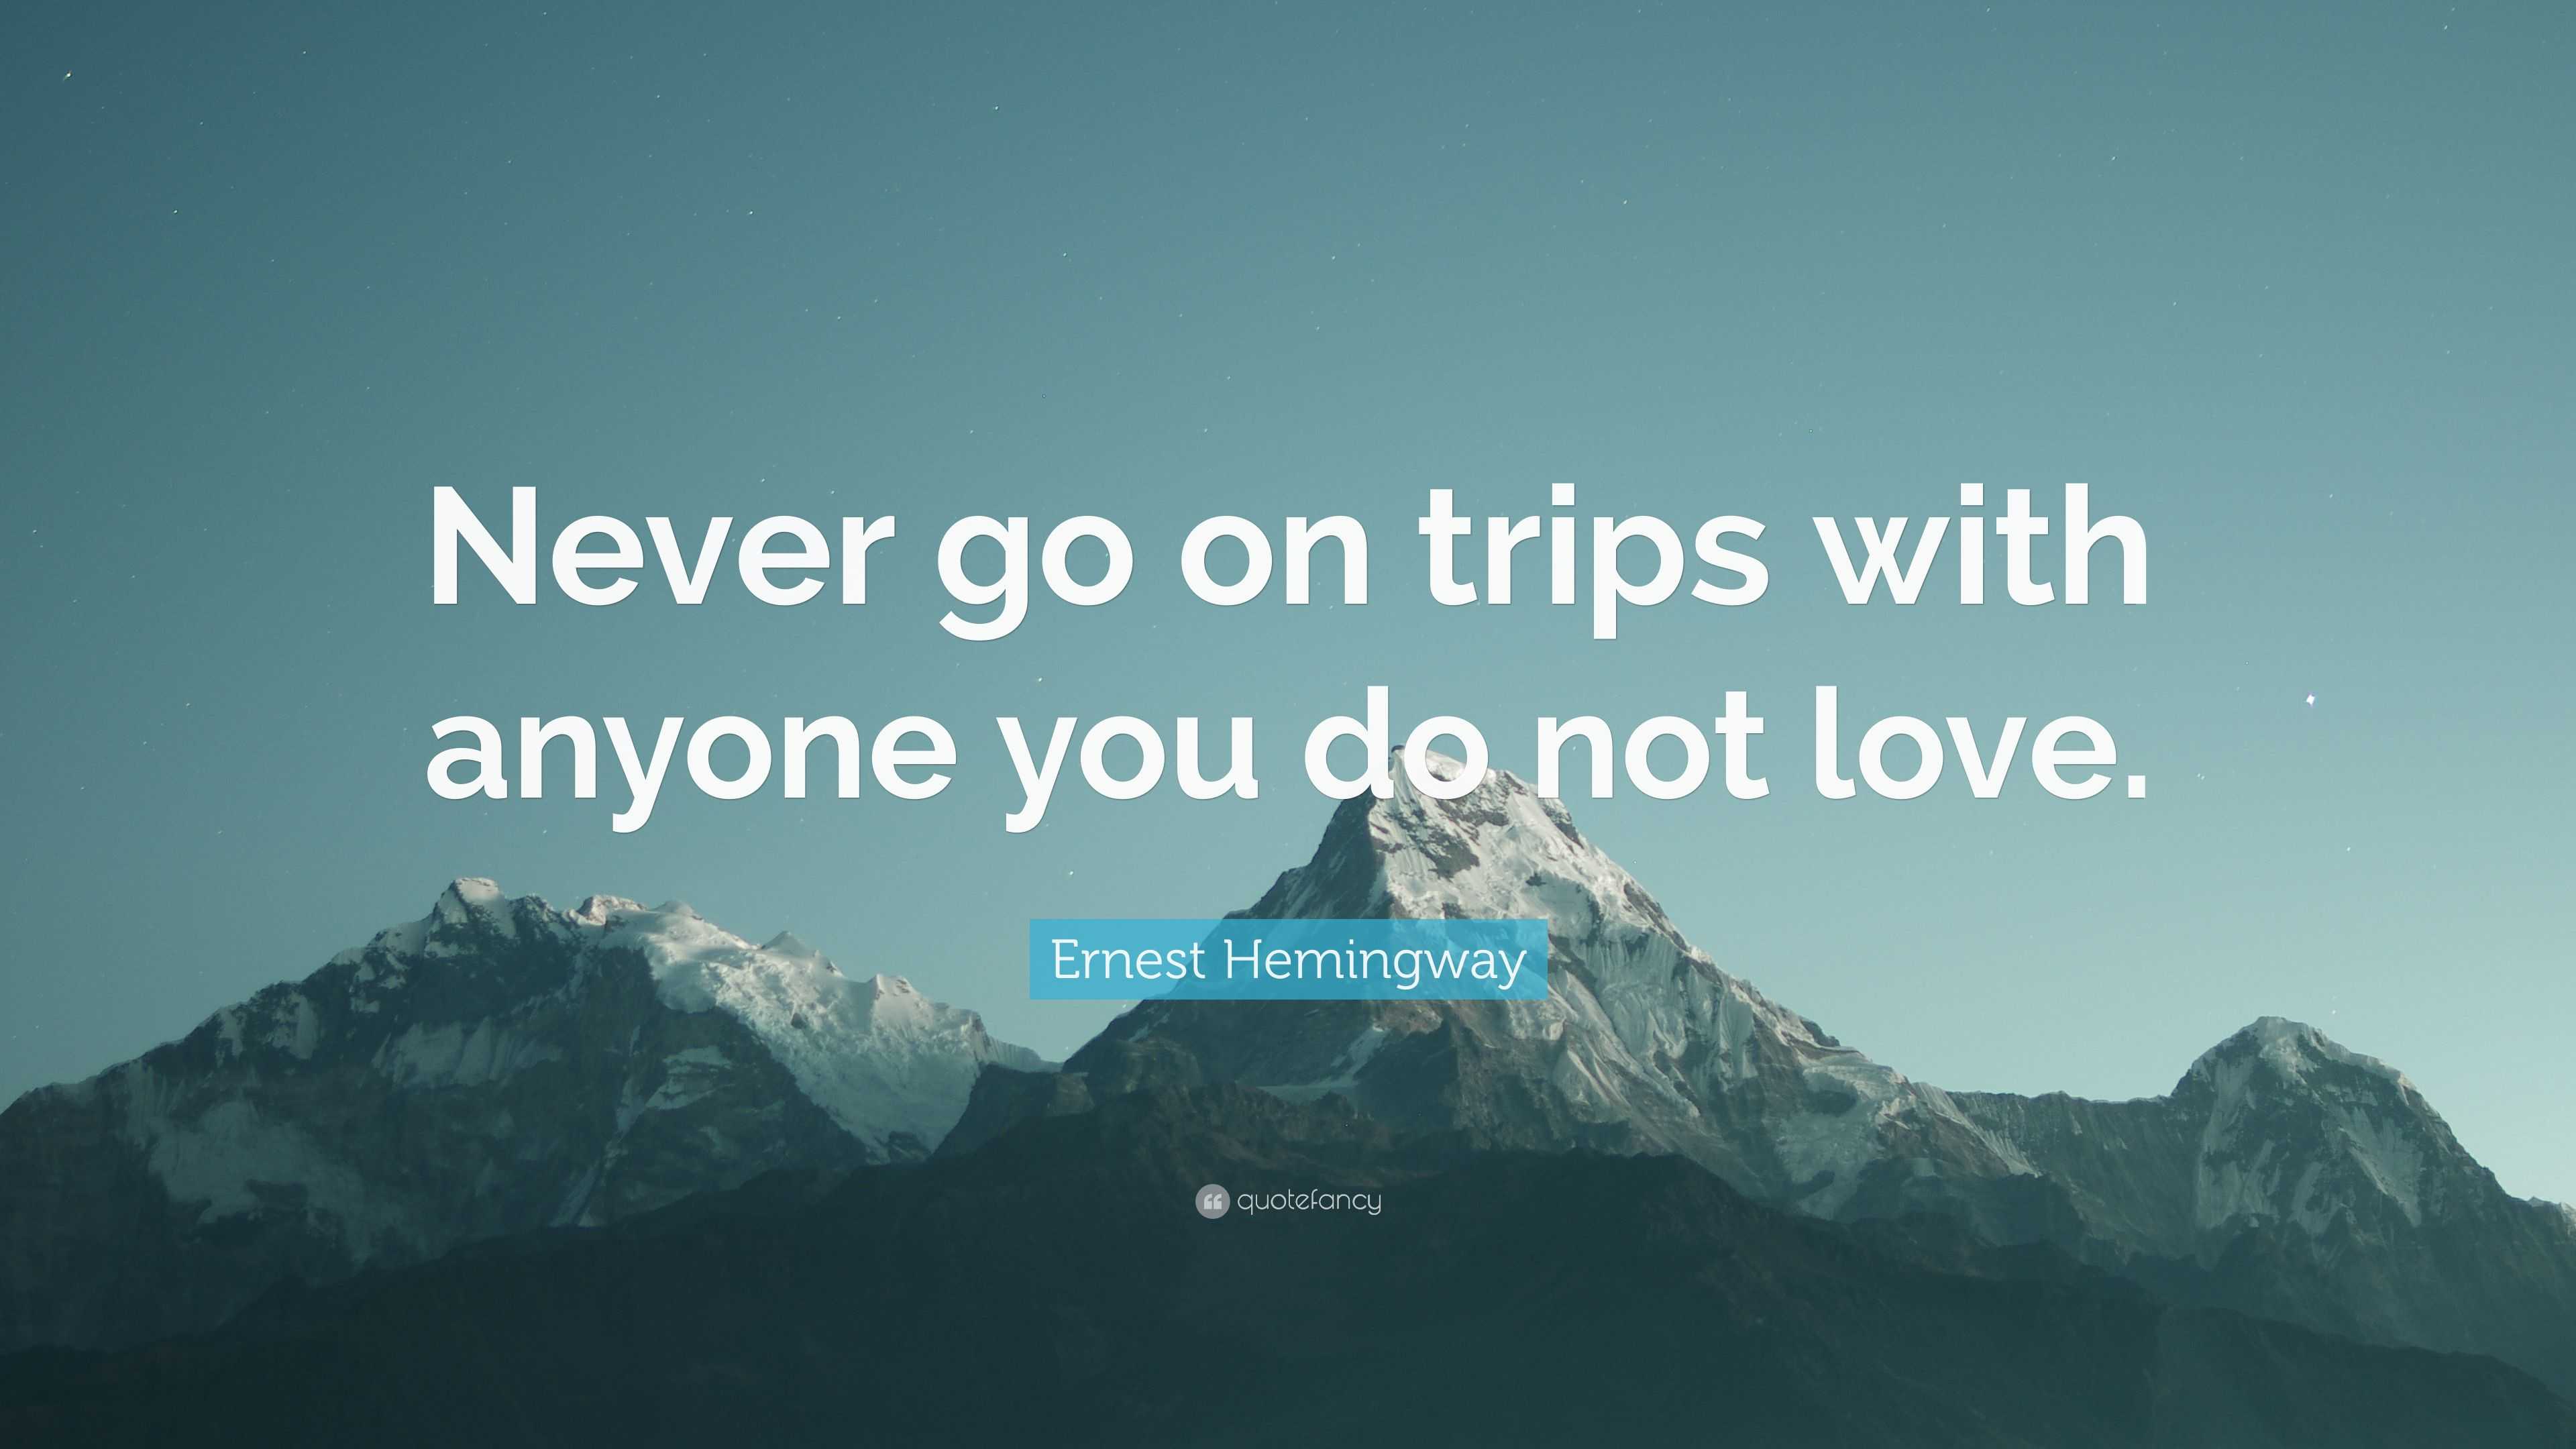 Ernest Hemingway Quote: “Never go on trips with anyone you do not love.”